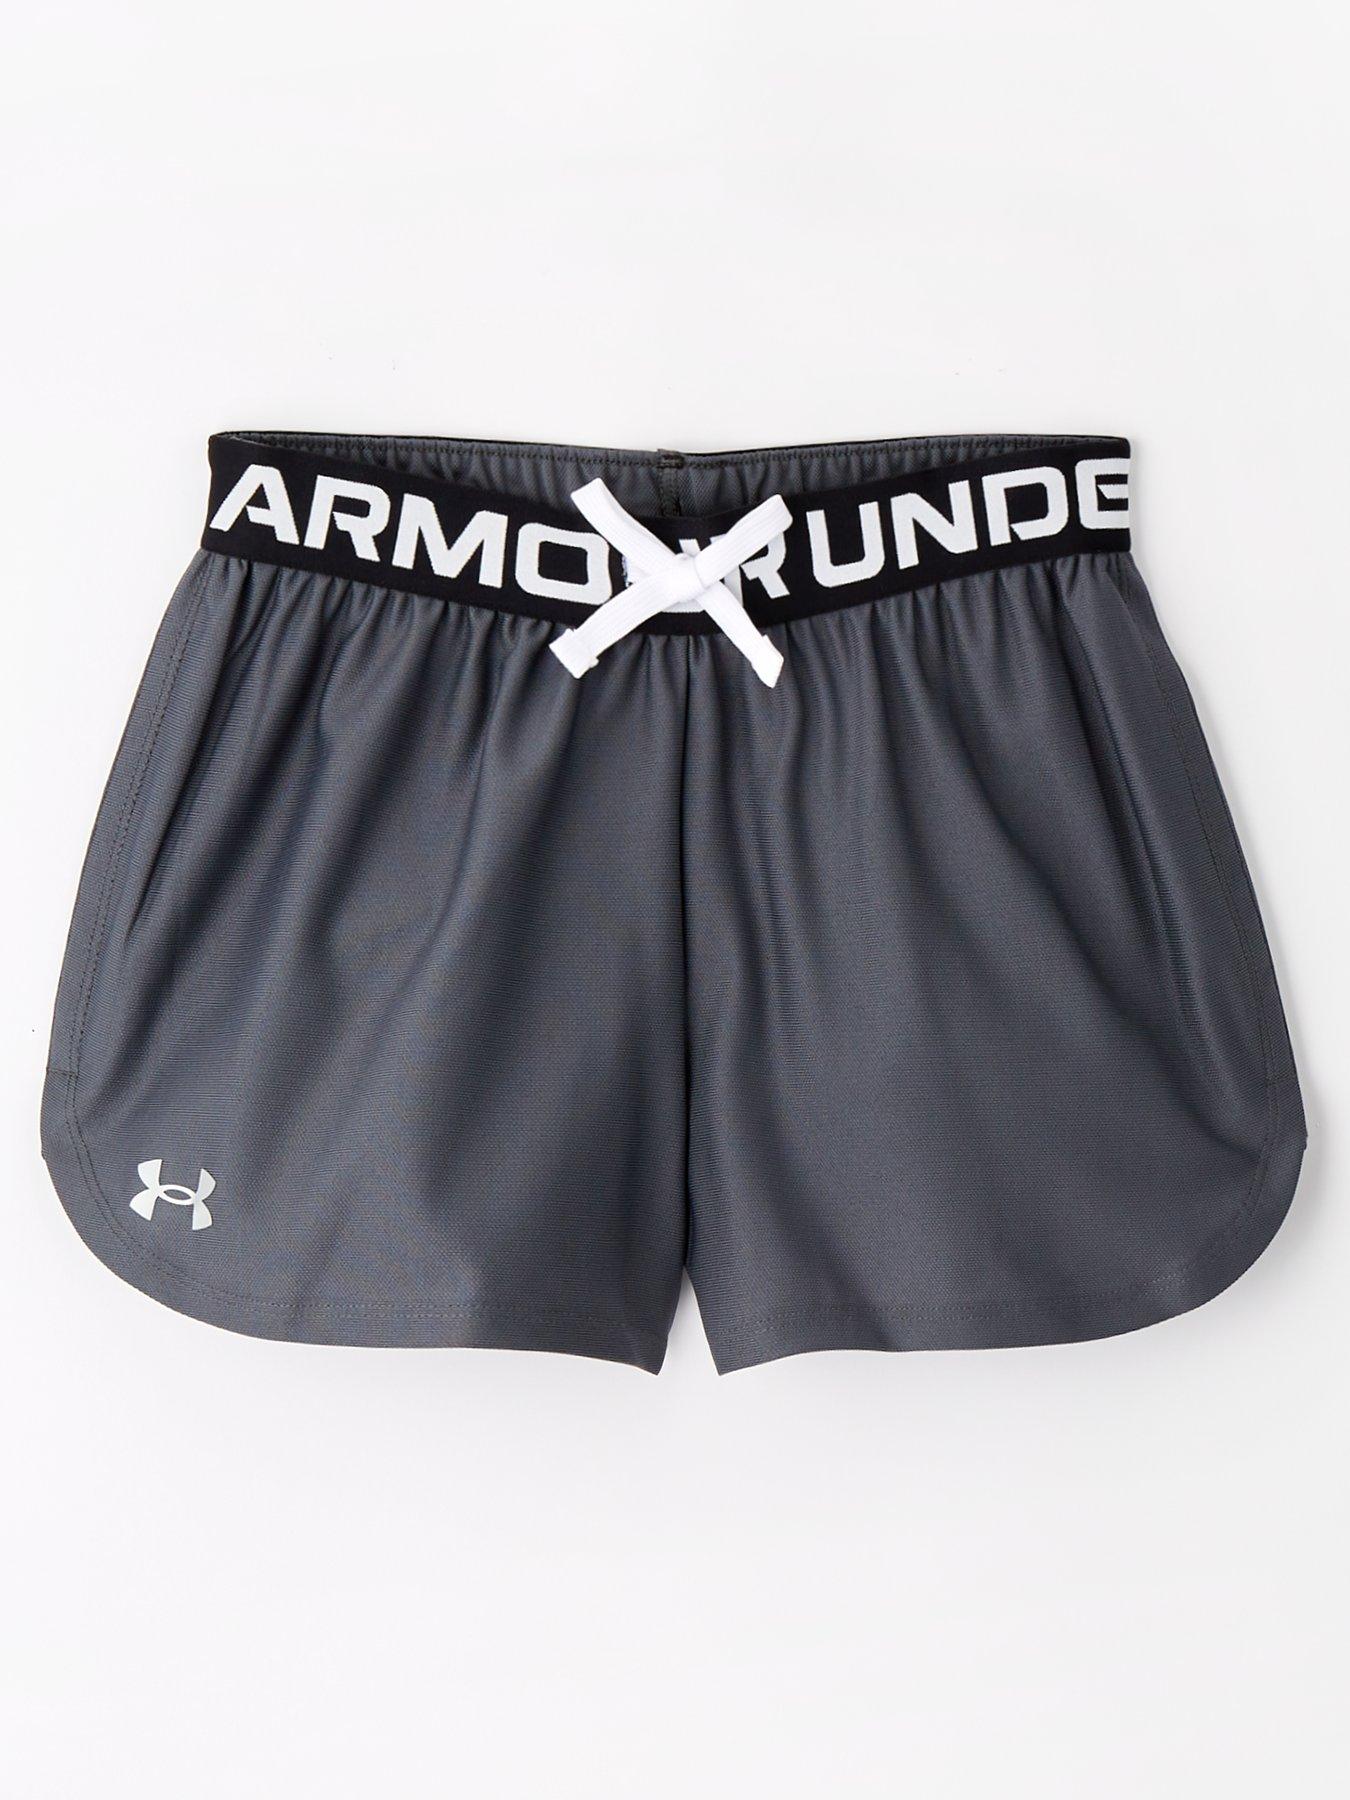 Under Armour Girls' Play Up Solid Shorts - Black/Silver